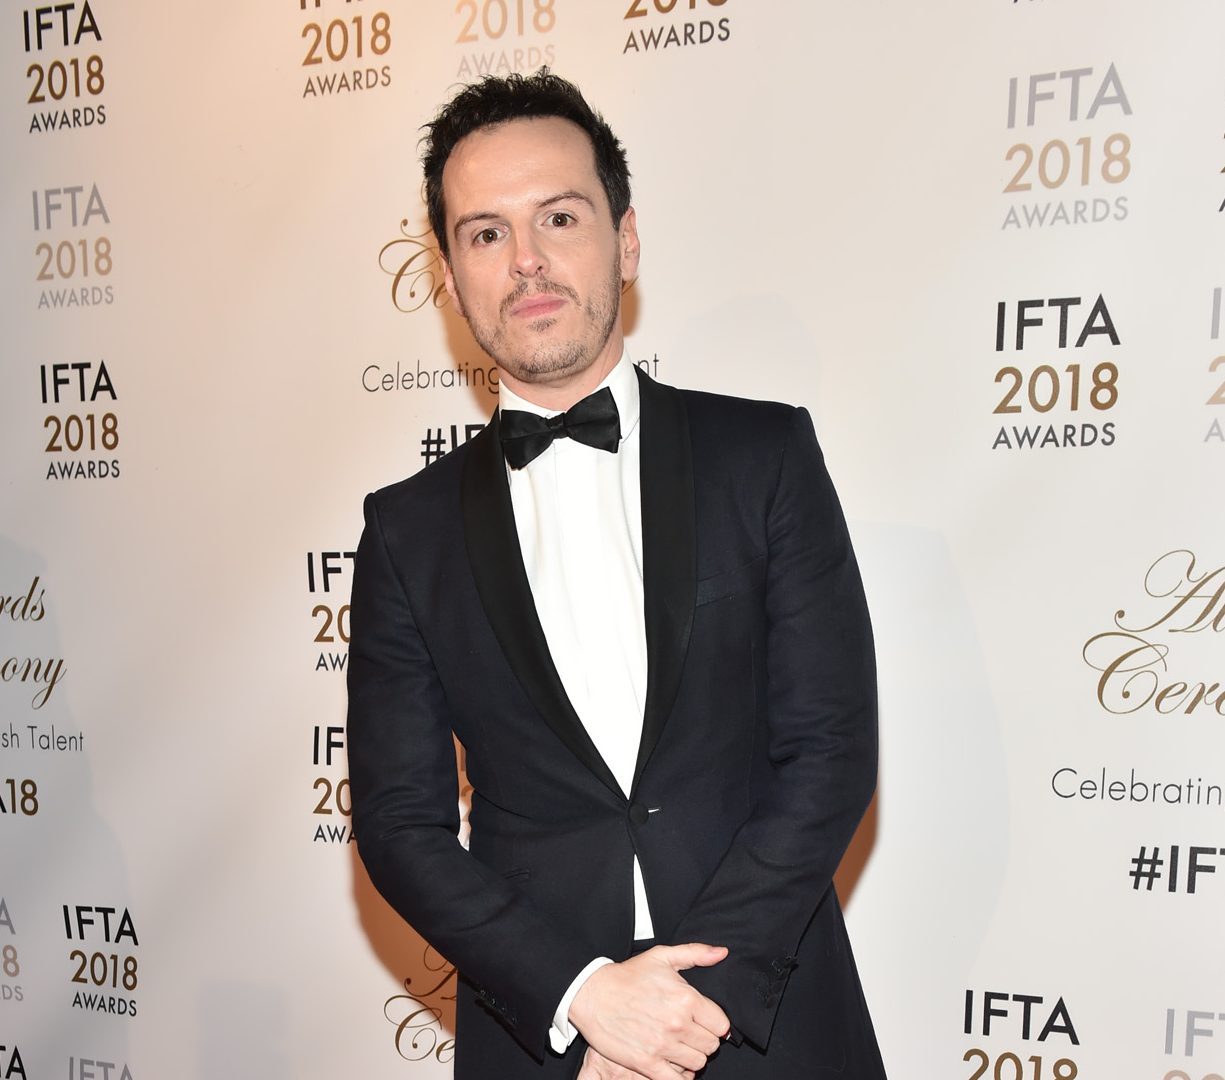 Irish actor Andrew Scott nominated for major award for his role in